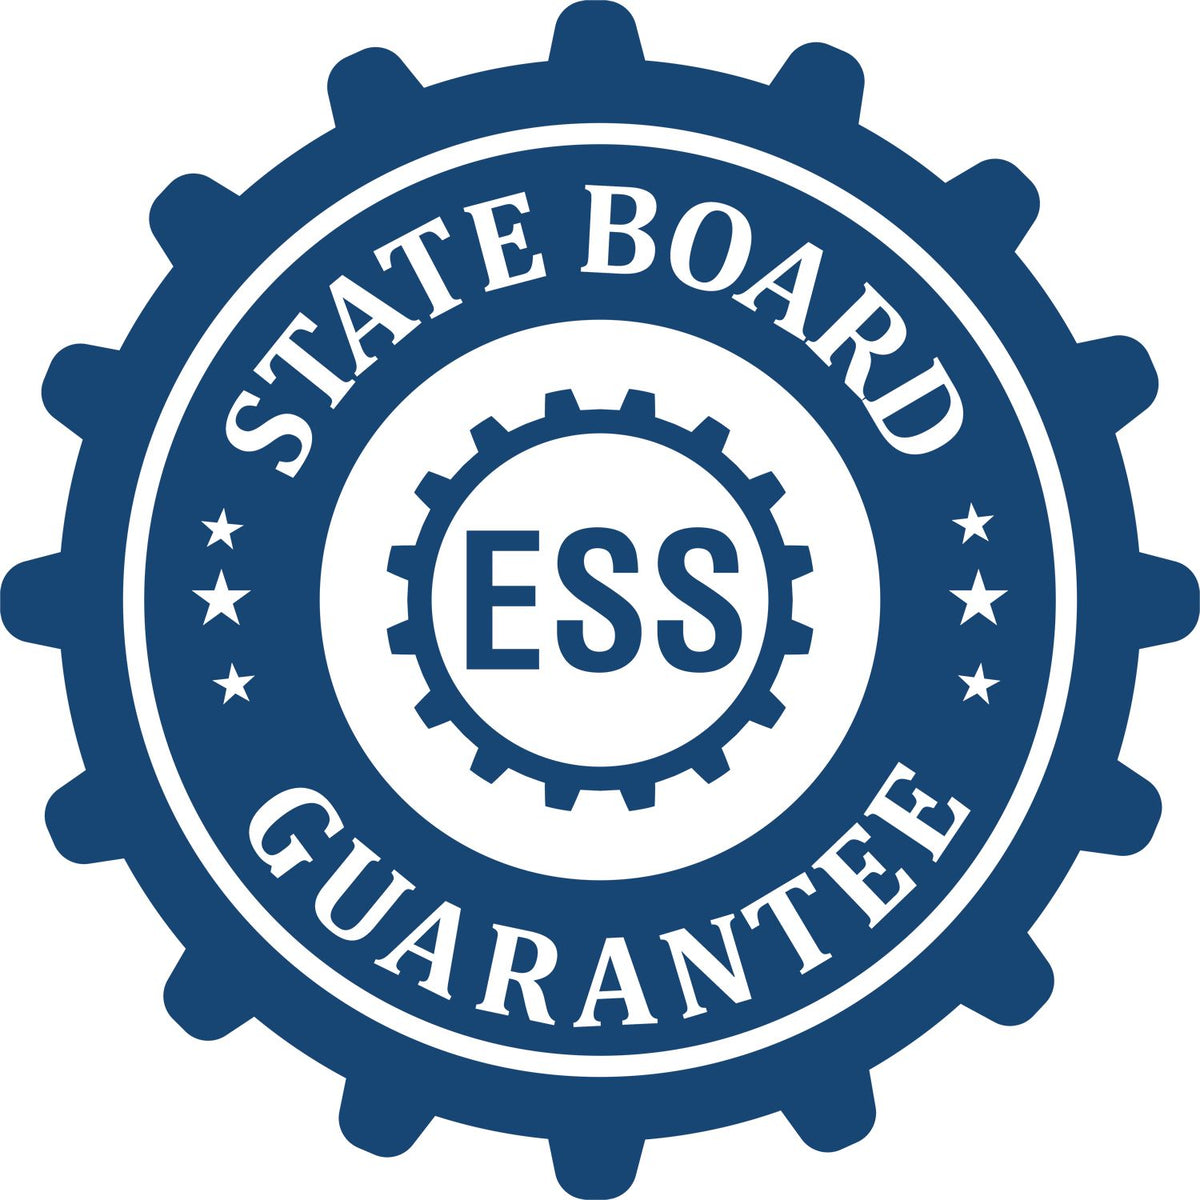 An emblem in a gear shape illustrating a state board guarantee for the New Jersey Desk Architect Embossing Seal product.